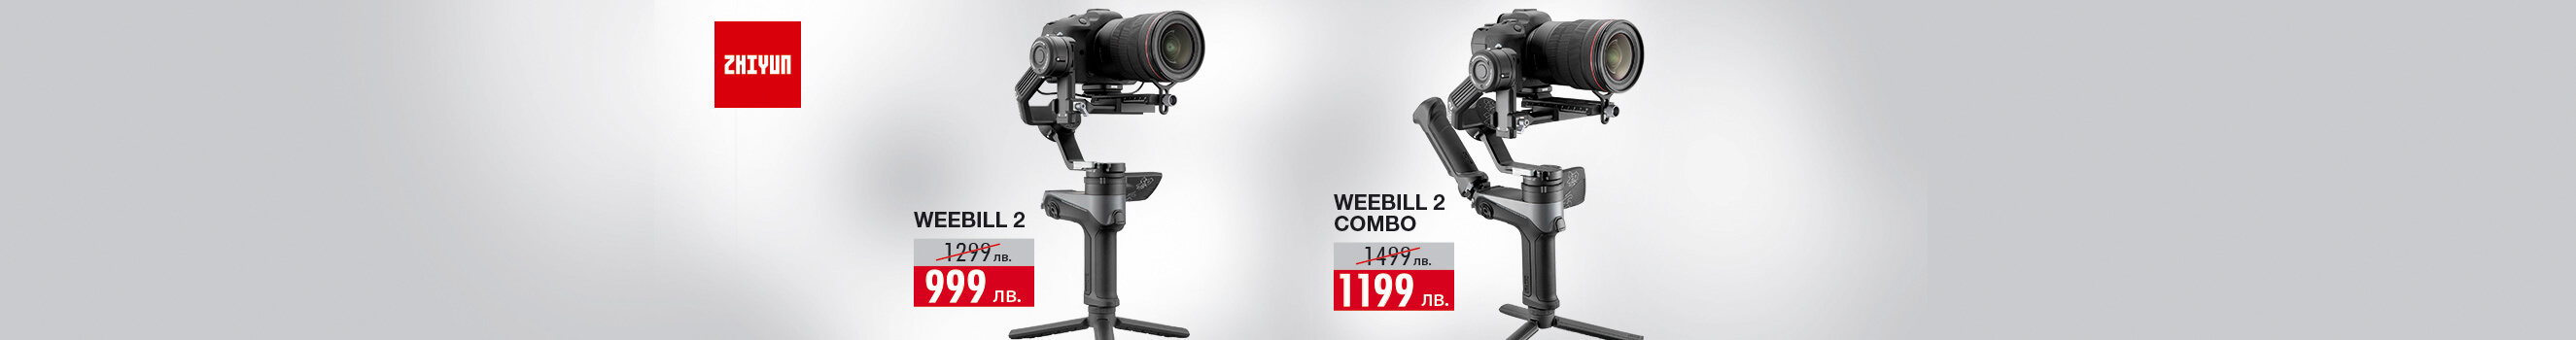  Zhiyun Weebill 2 Gimbals at Promo Prices in PhotoSynthesis stores